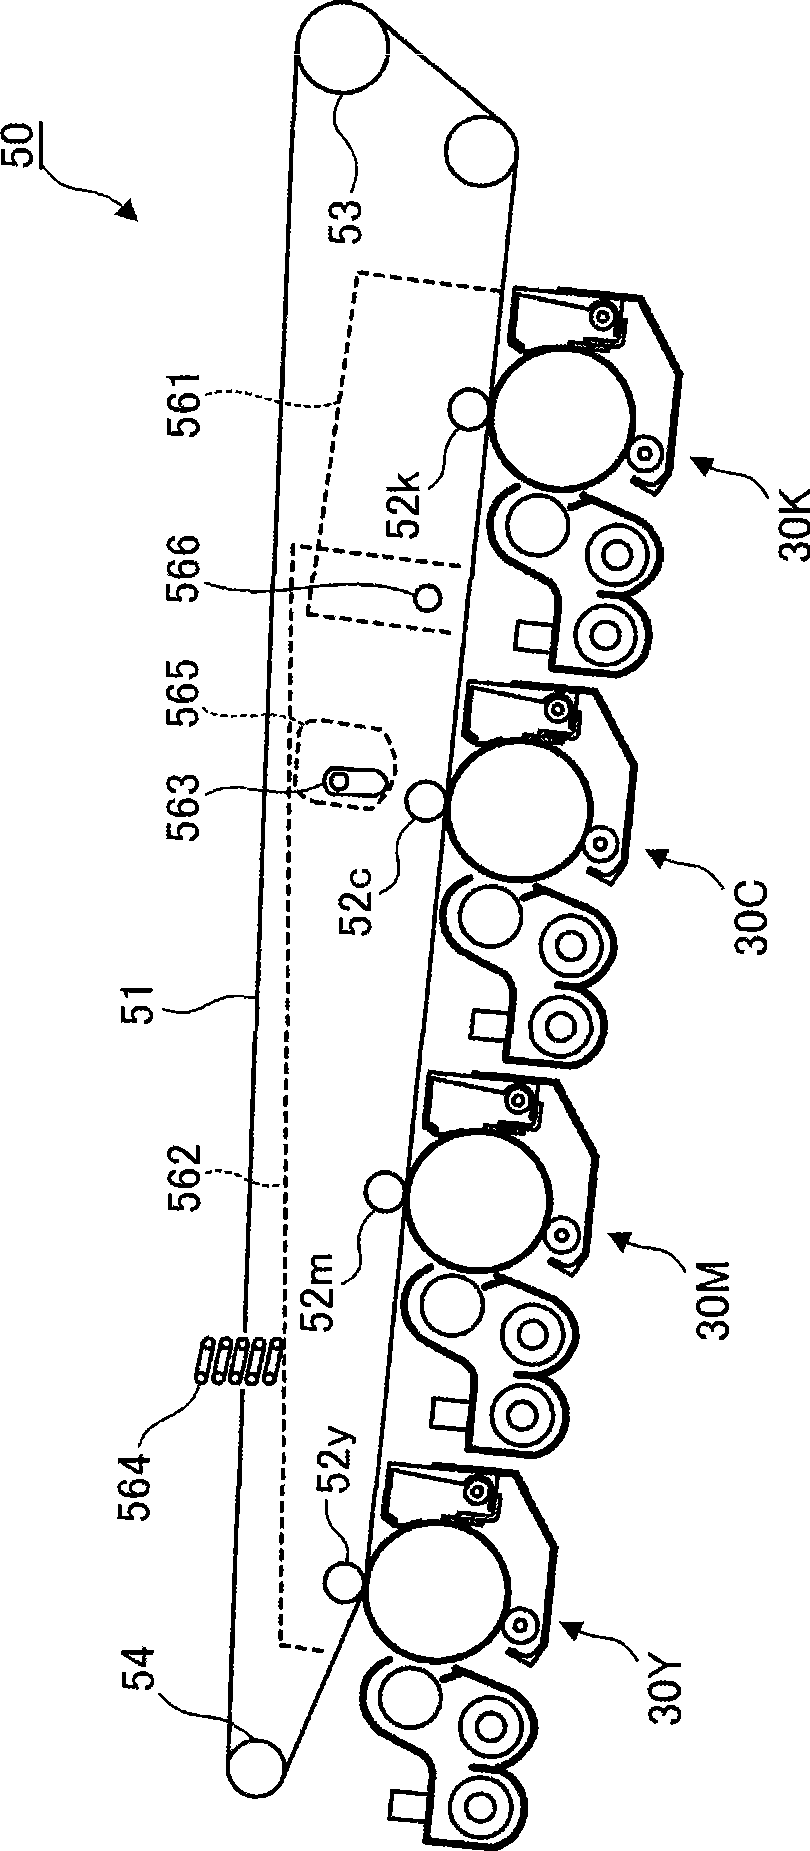 Image forming apparatus, and related methods